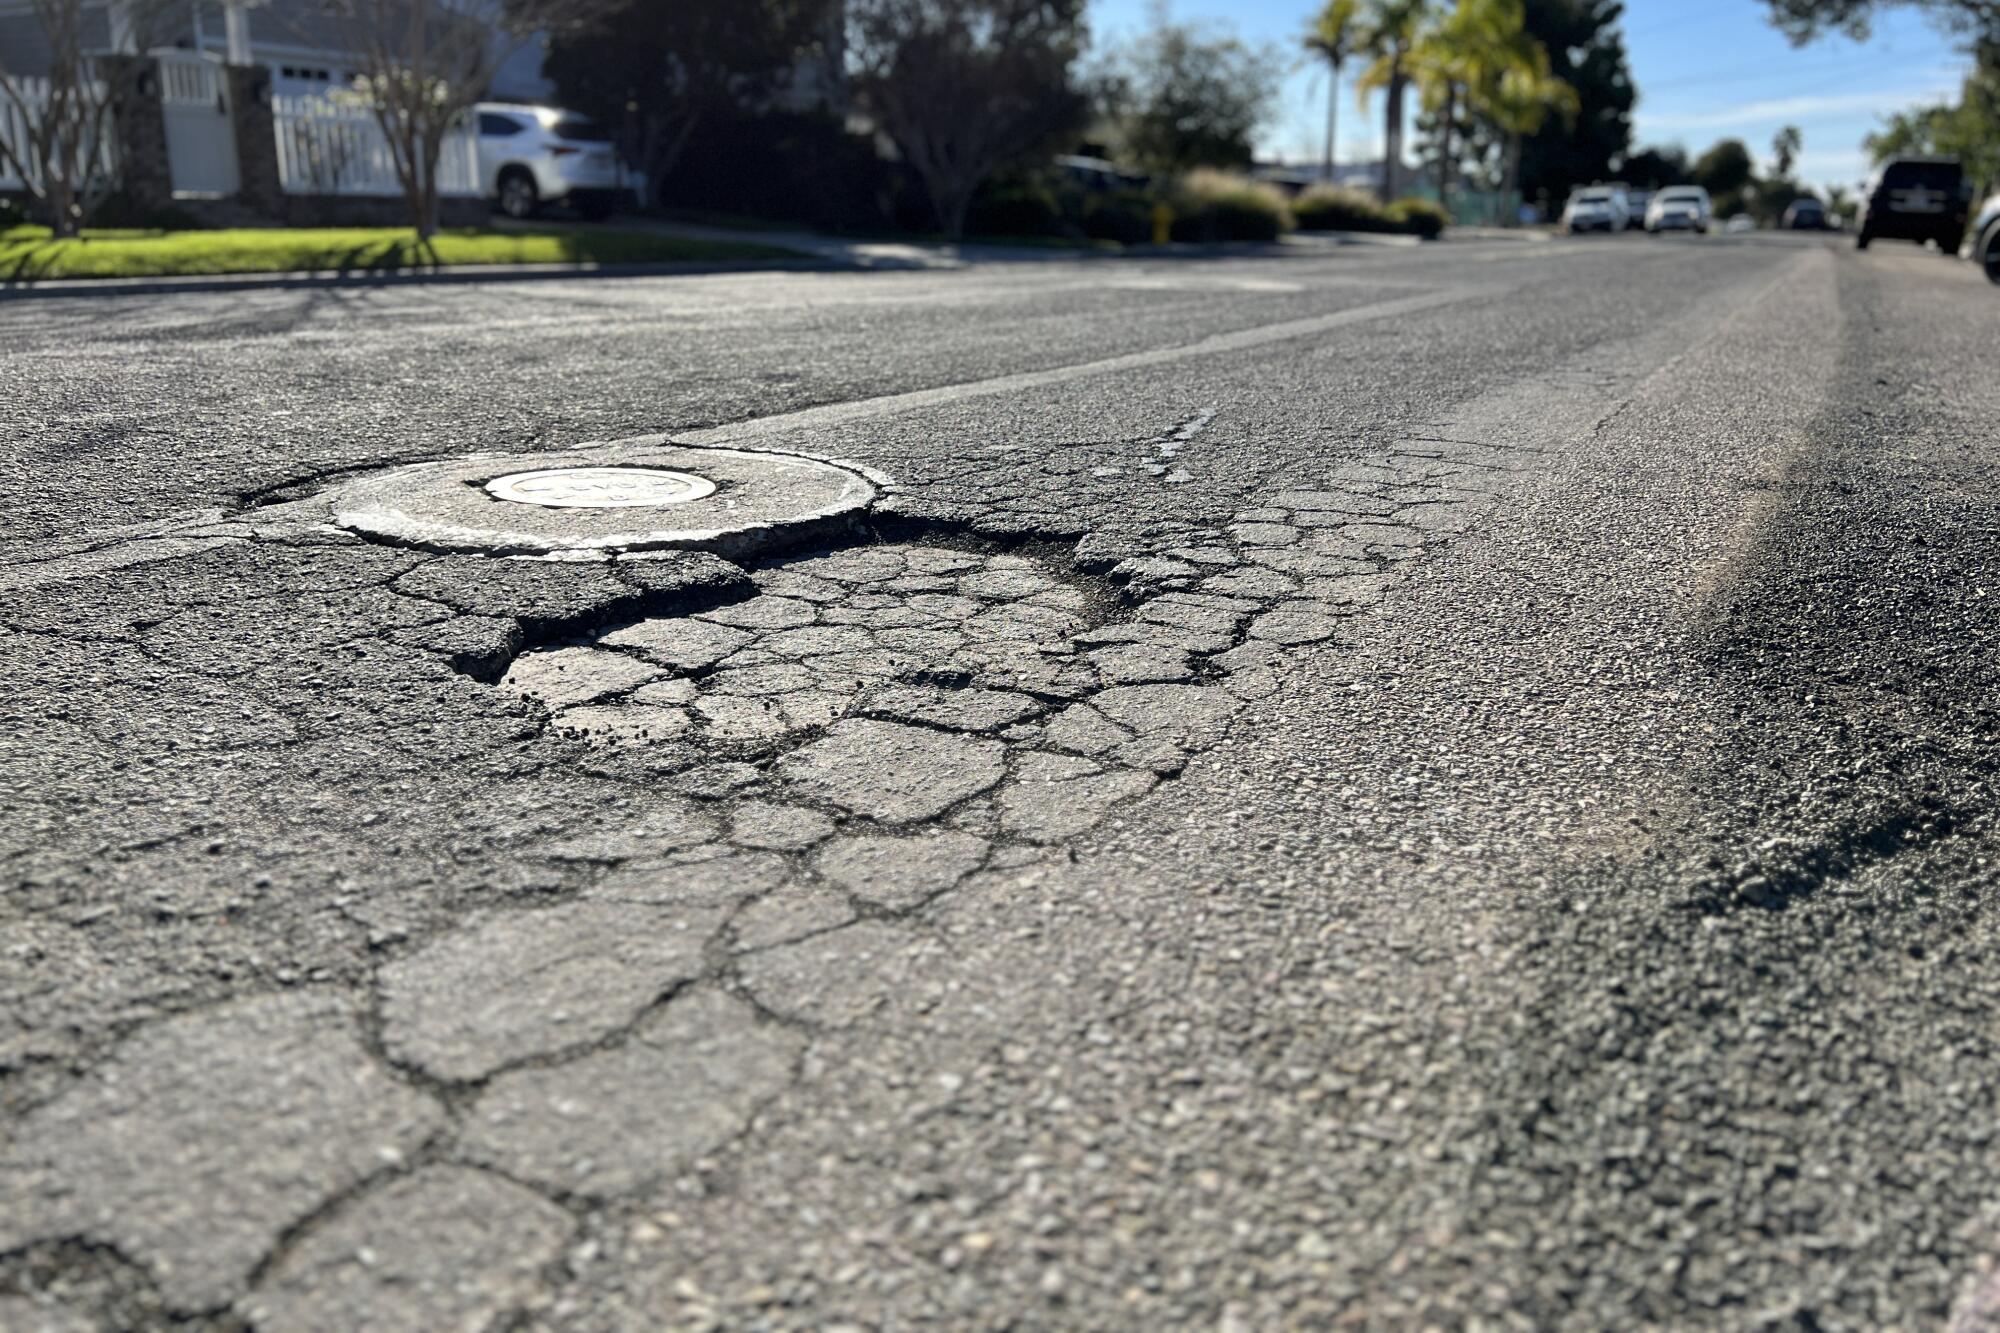 La Jolla area has one of the steepest drops in road quality in new survey  of San Diego's streets - La Jolla Light